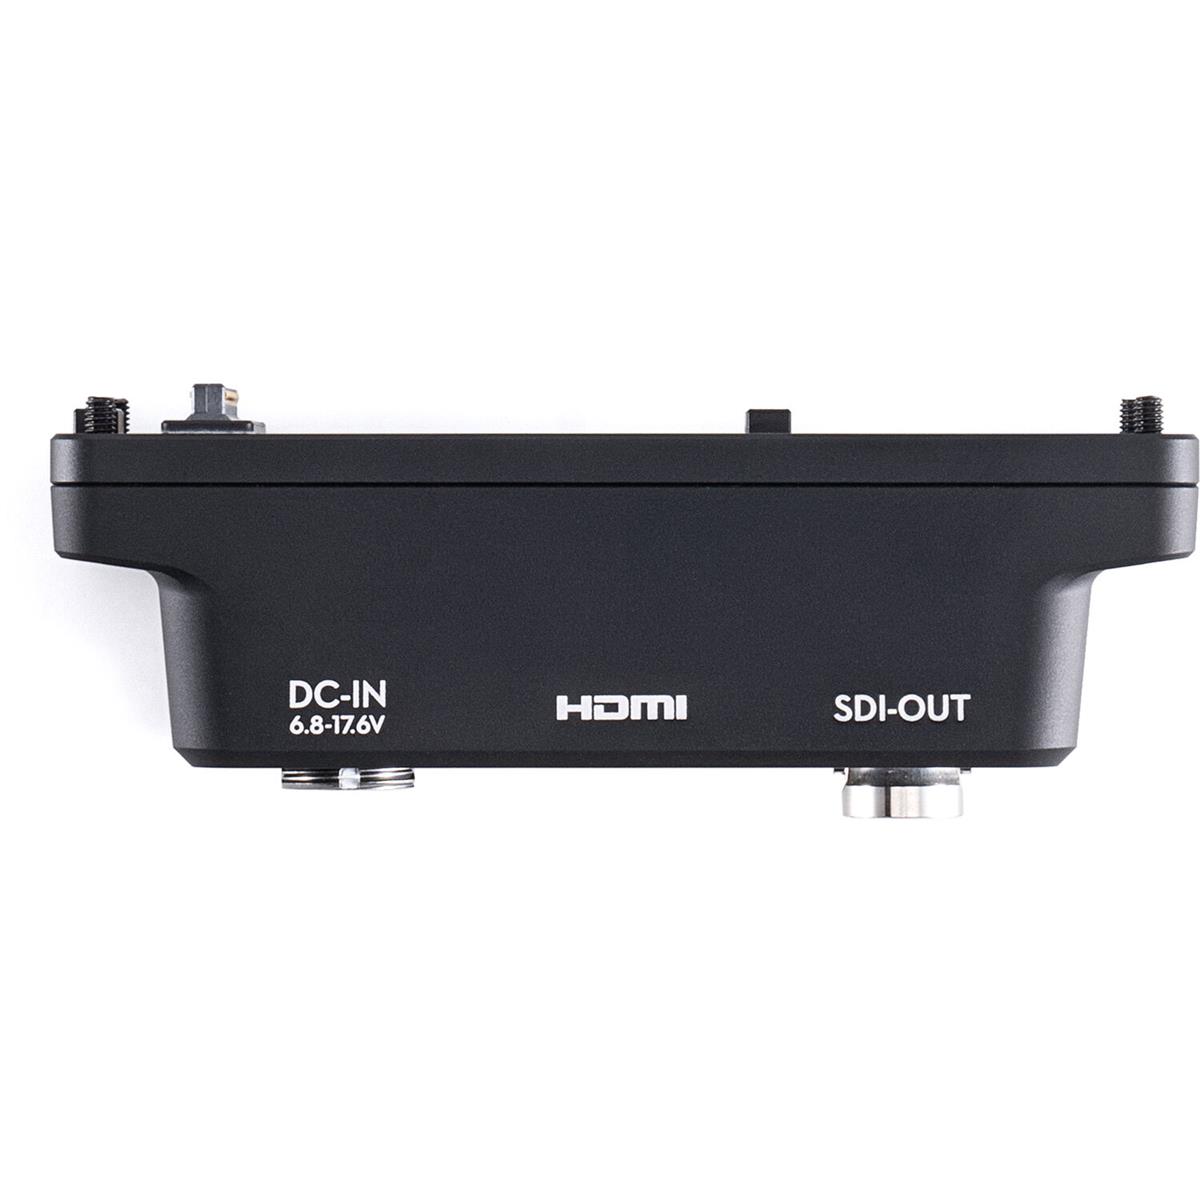 Photos - Cable (video, audio, USB) DJI Remote Monitor Expansion Plate with SDI/HDMI/DC-IN Port CP.RN.00000184 